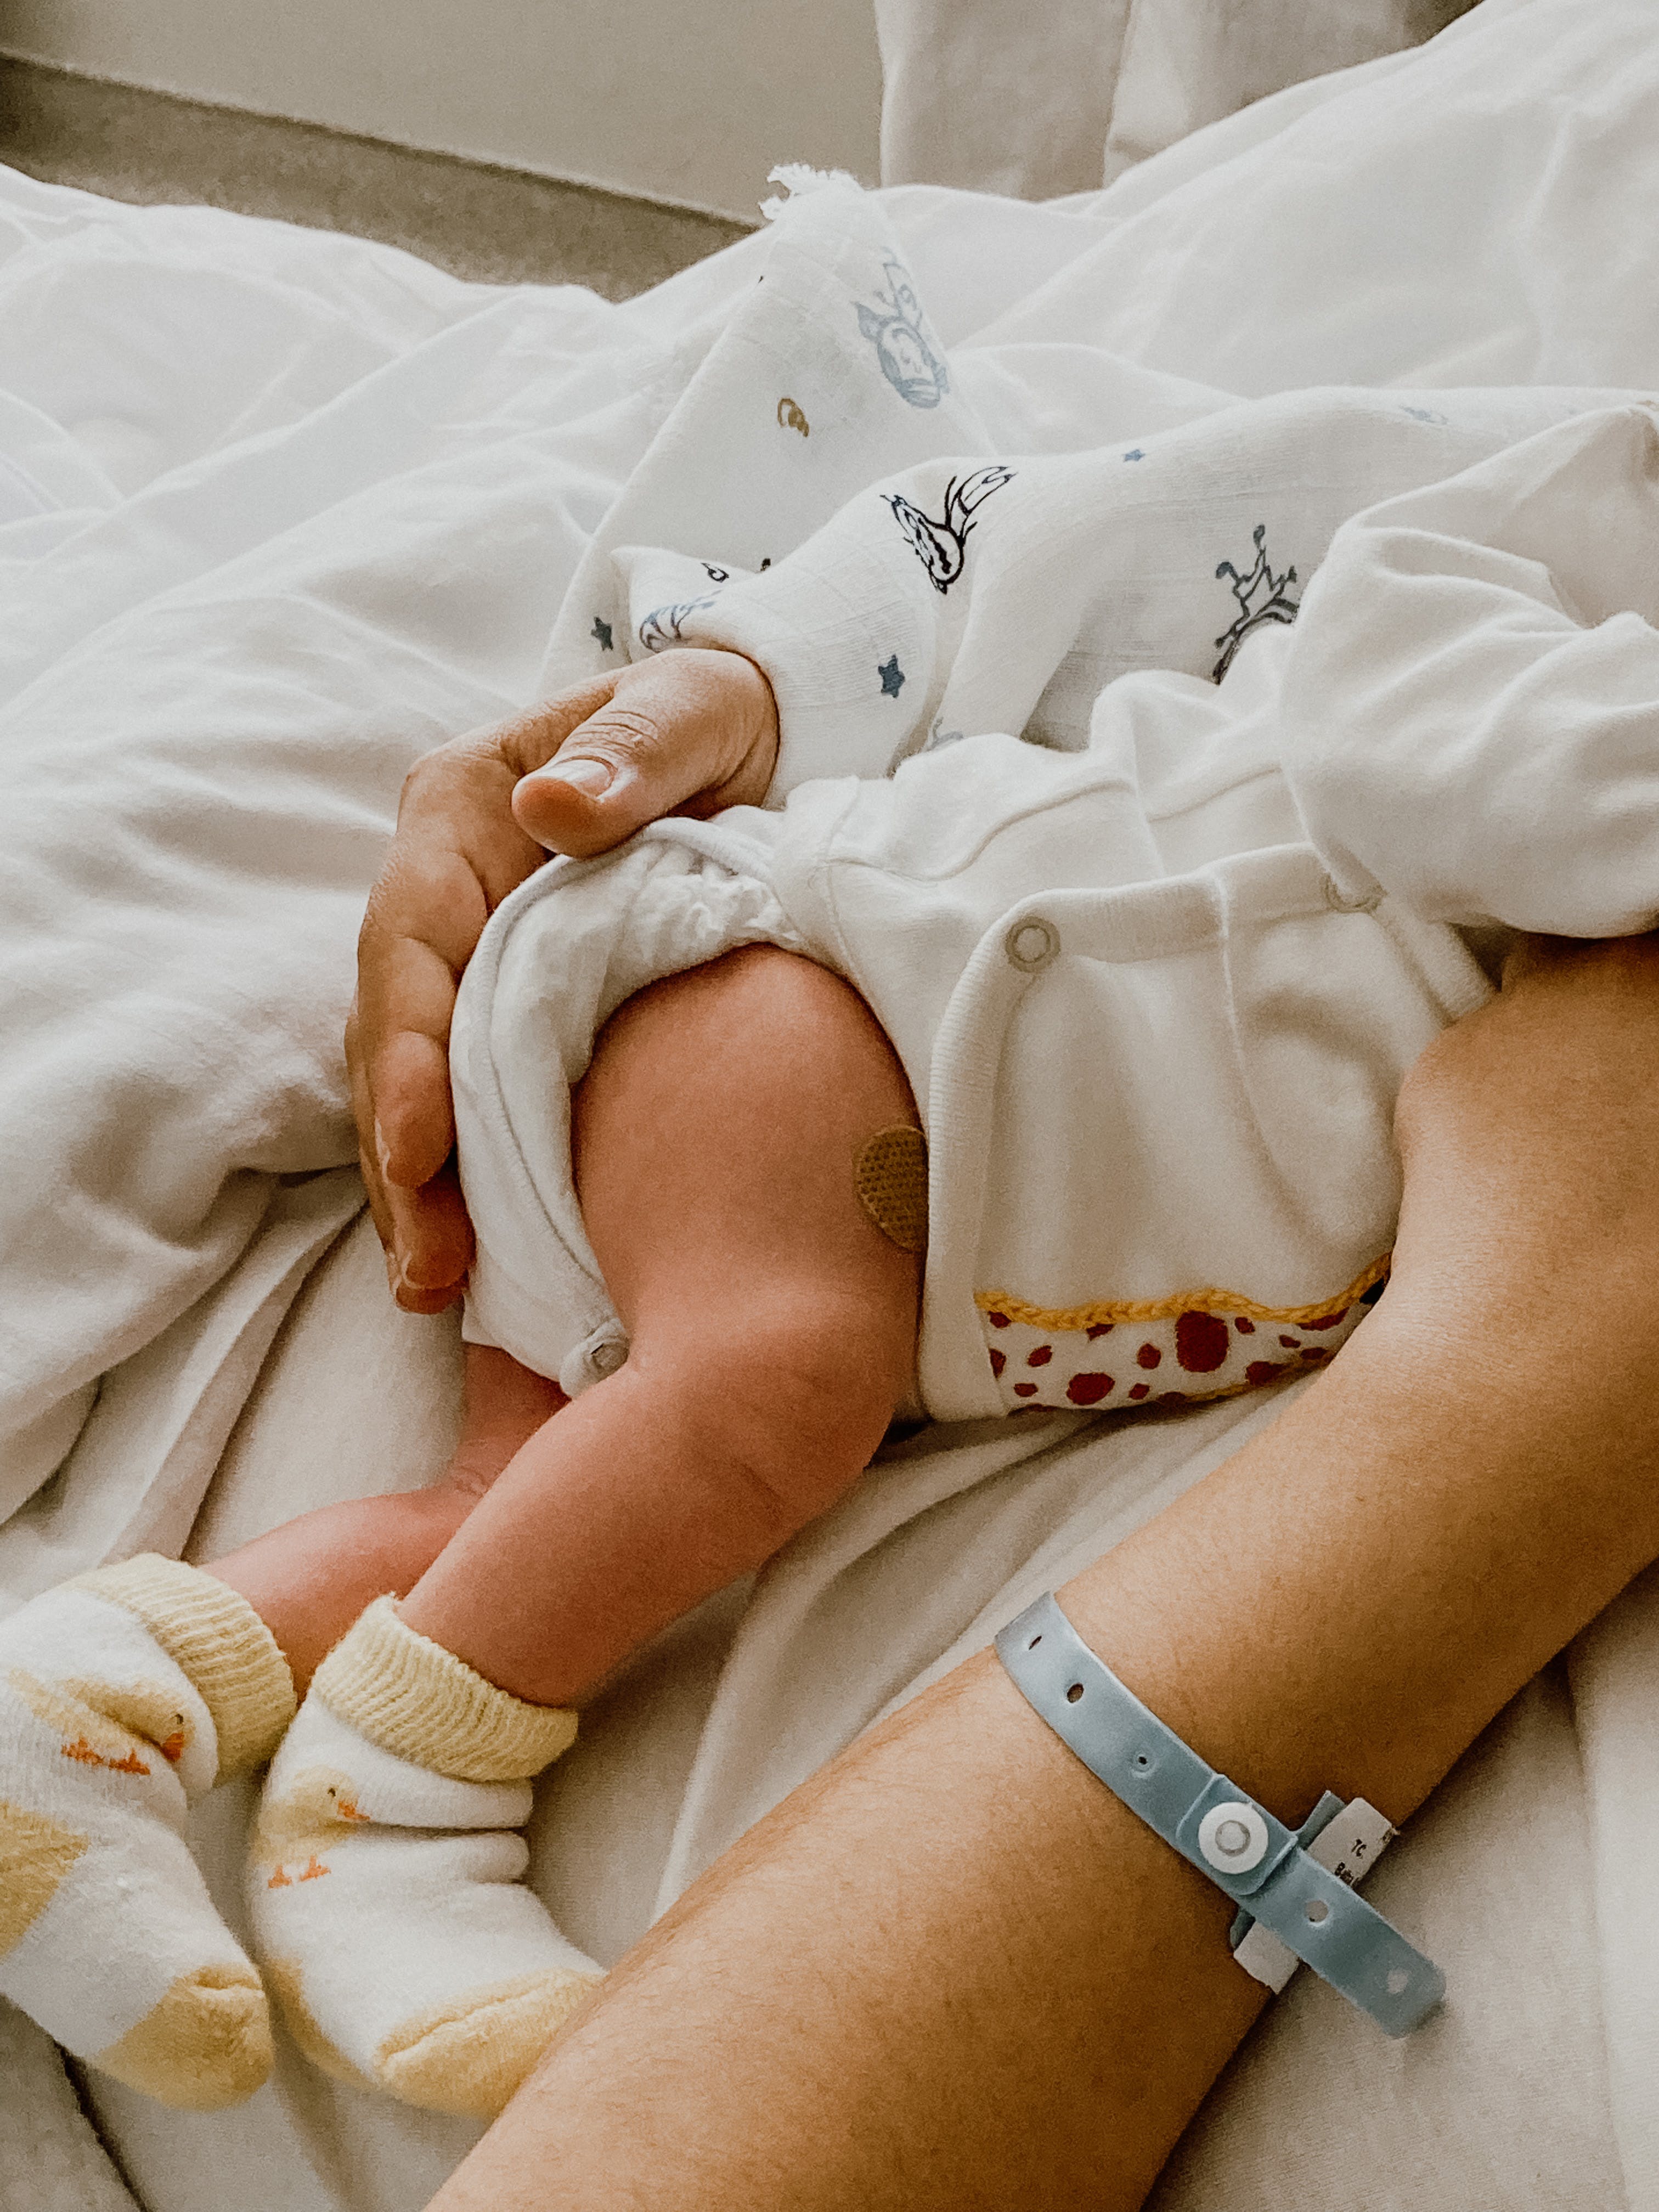 A woman holding a newborn baby | Source: Pexels